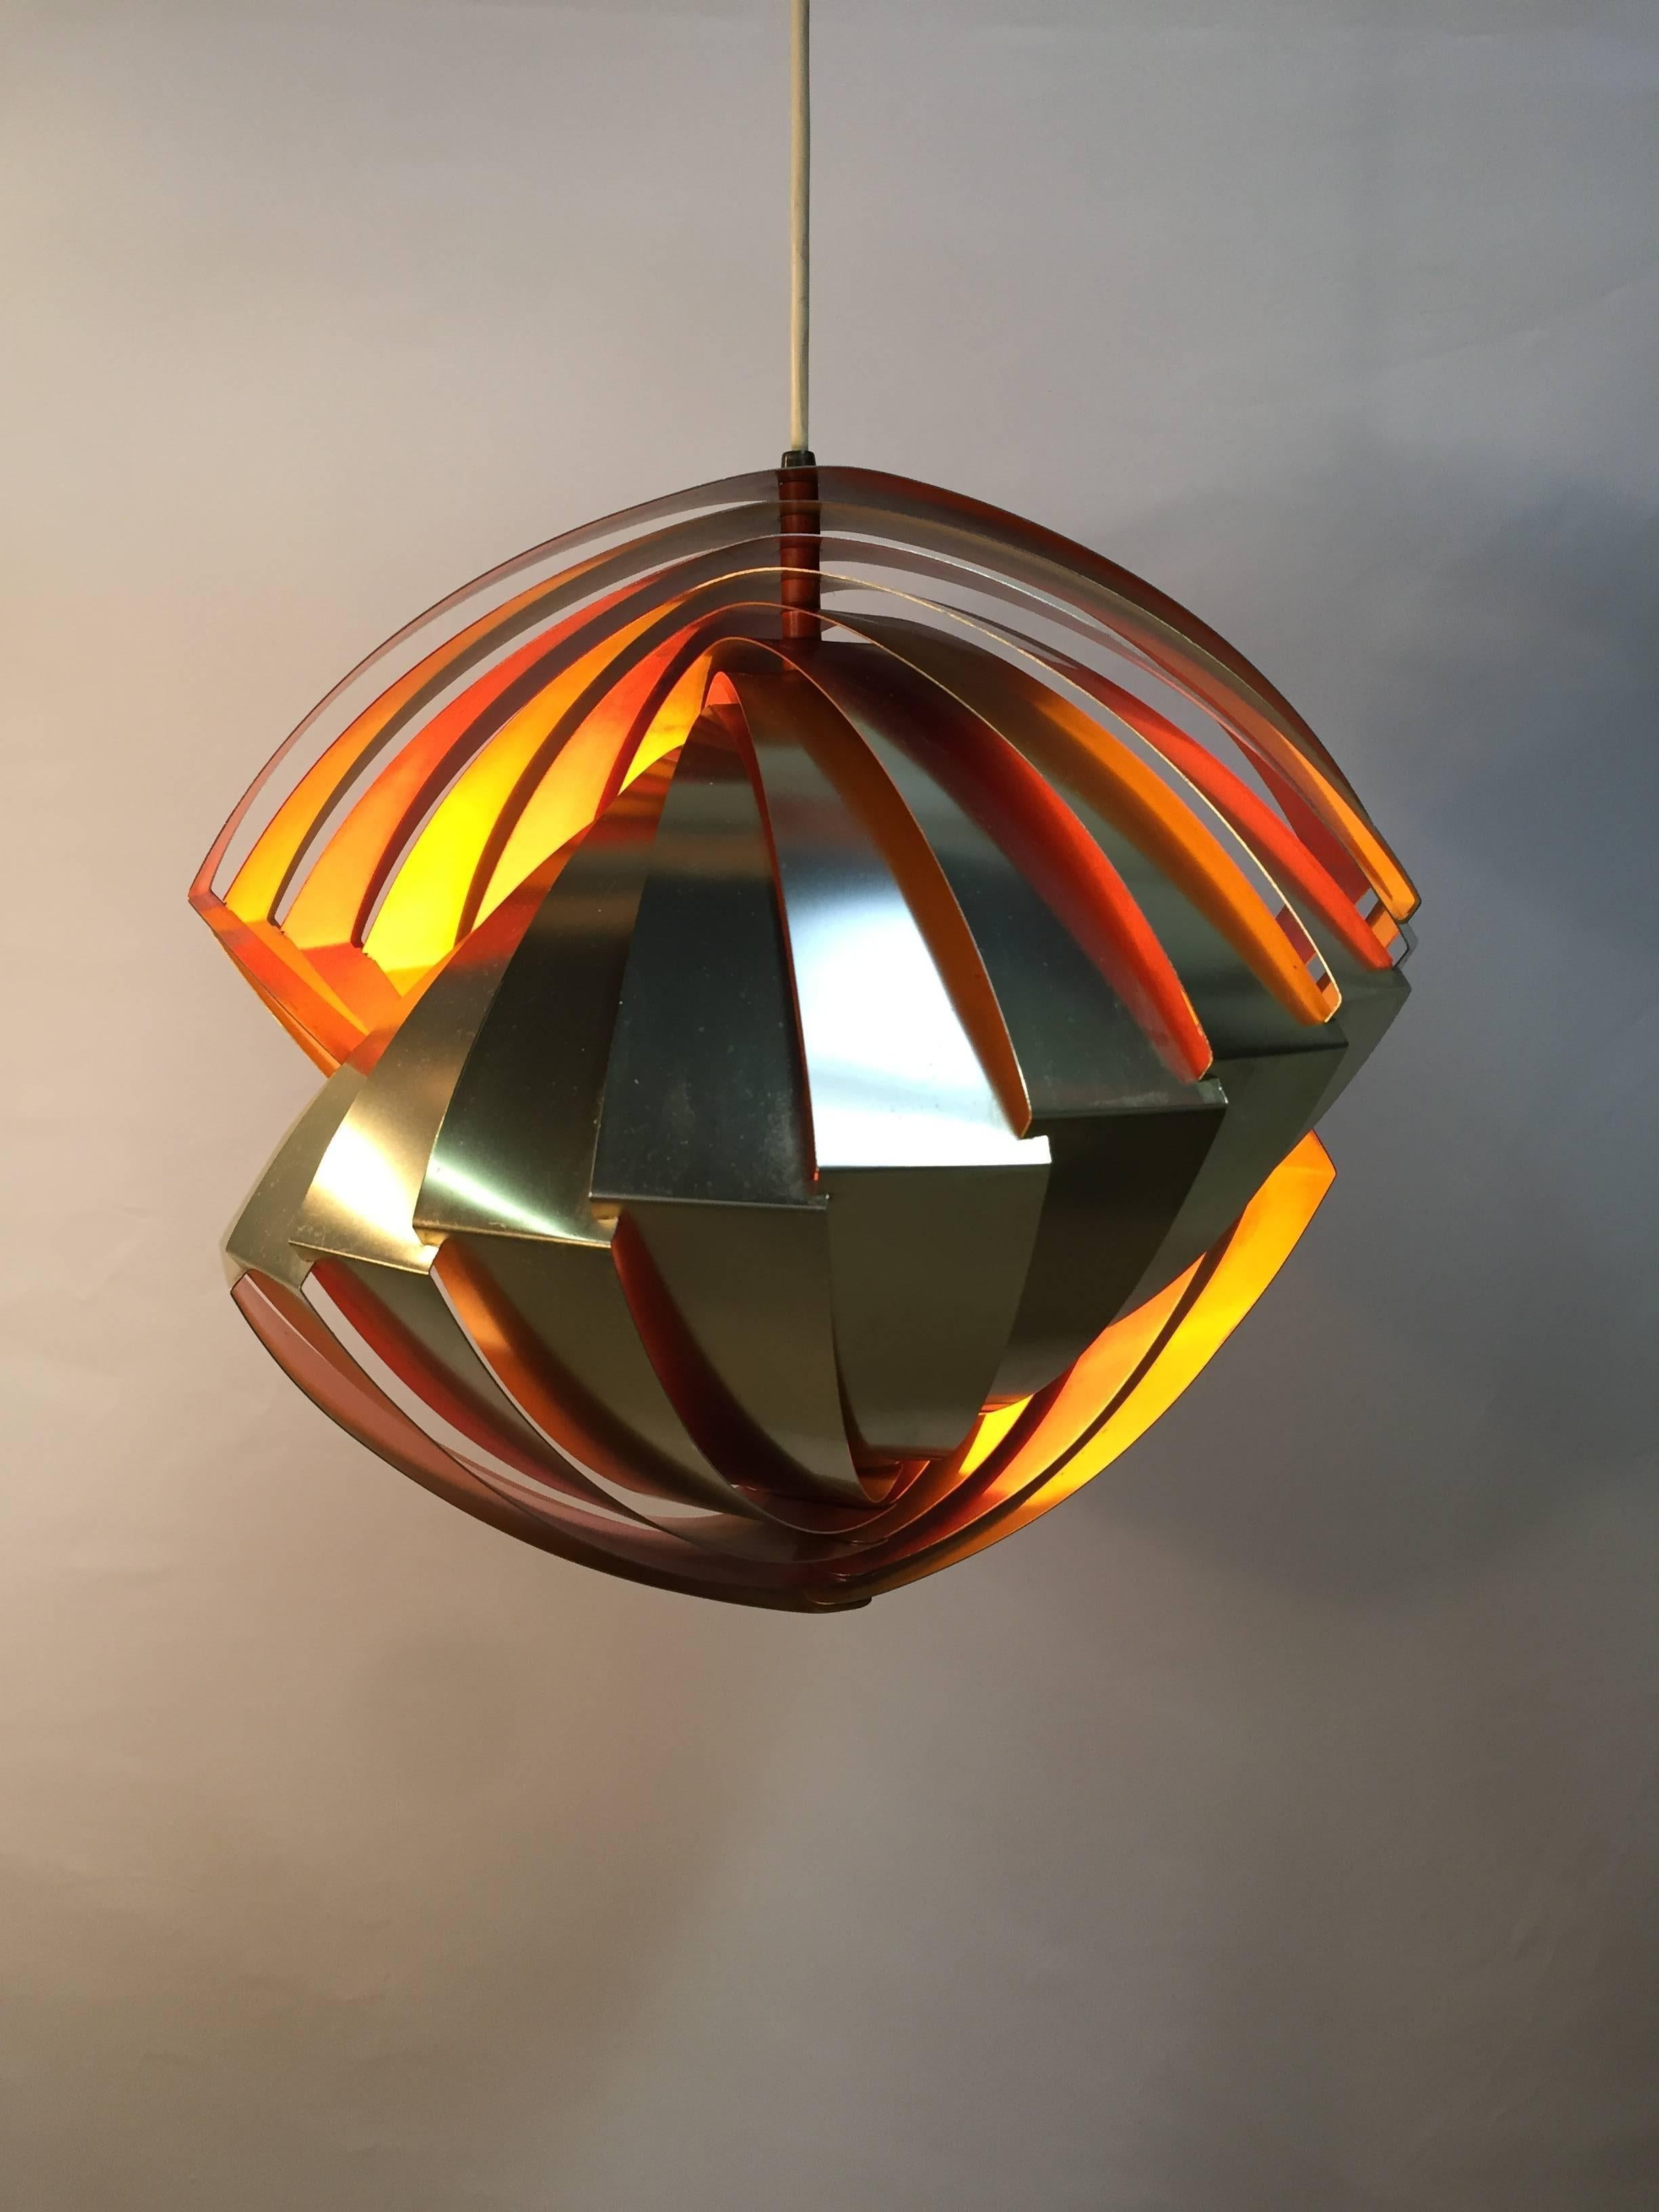 The iconic "Conch" pendant, was designed by Louis Weisdorf in 1964 for the Tivoli Garden in Copenhagen. Reputed to be Weisdorf's first design and limited in production numbers due to high manufacturing costs, these lights are difficult to